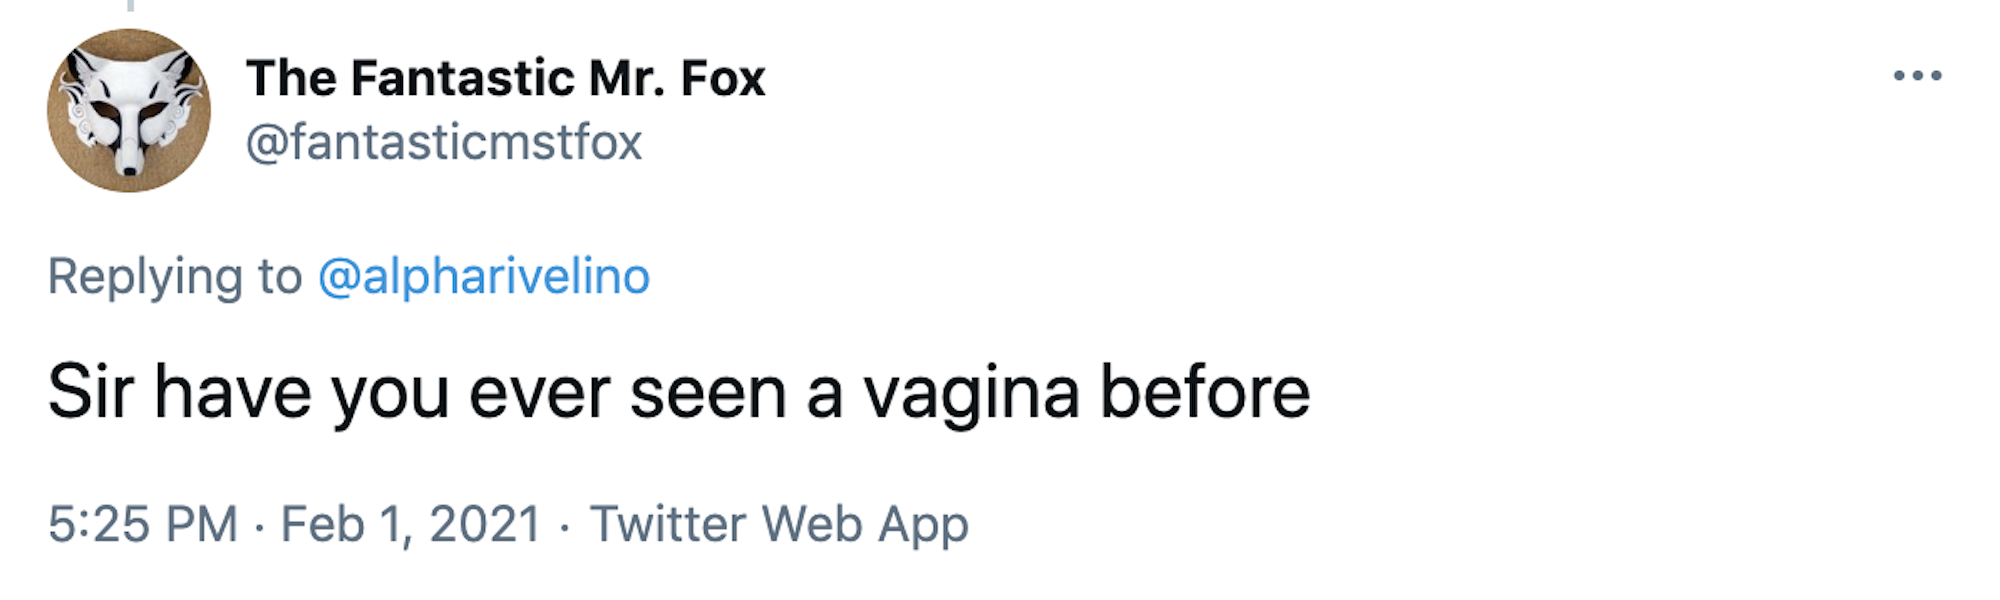 Sir, have you ever seen a vagina before?